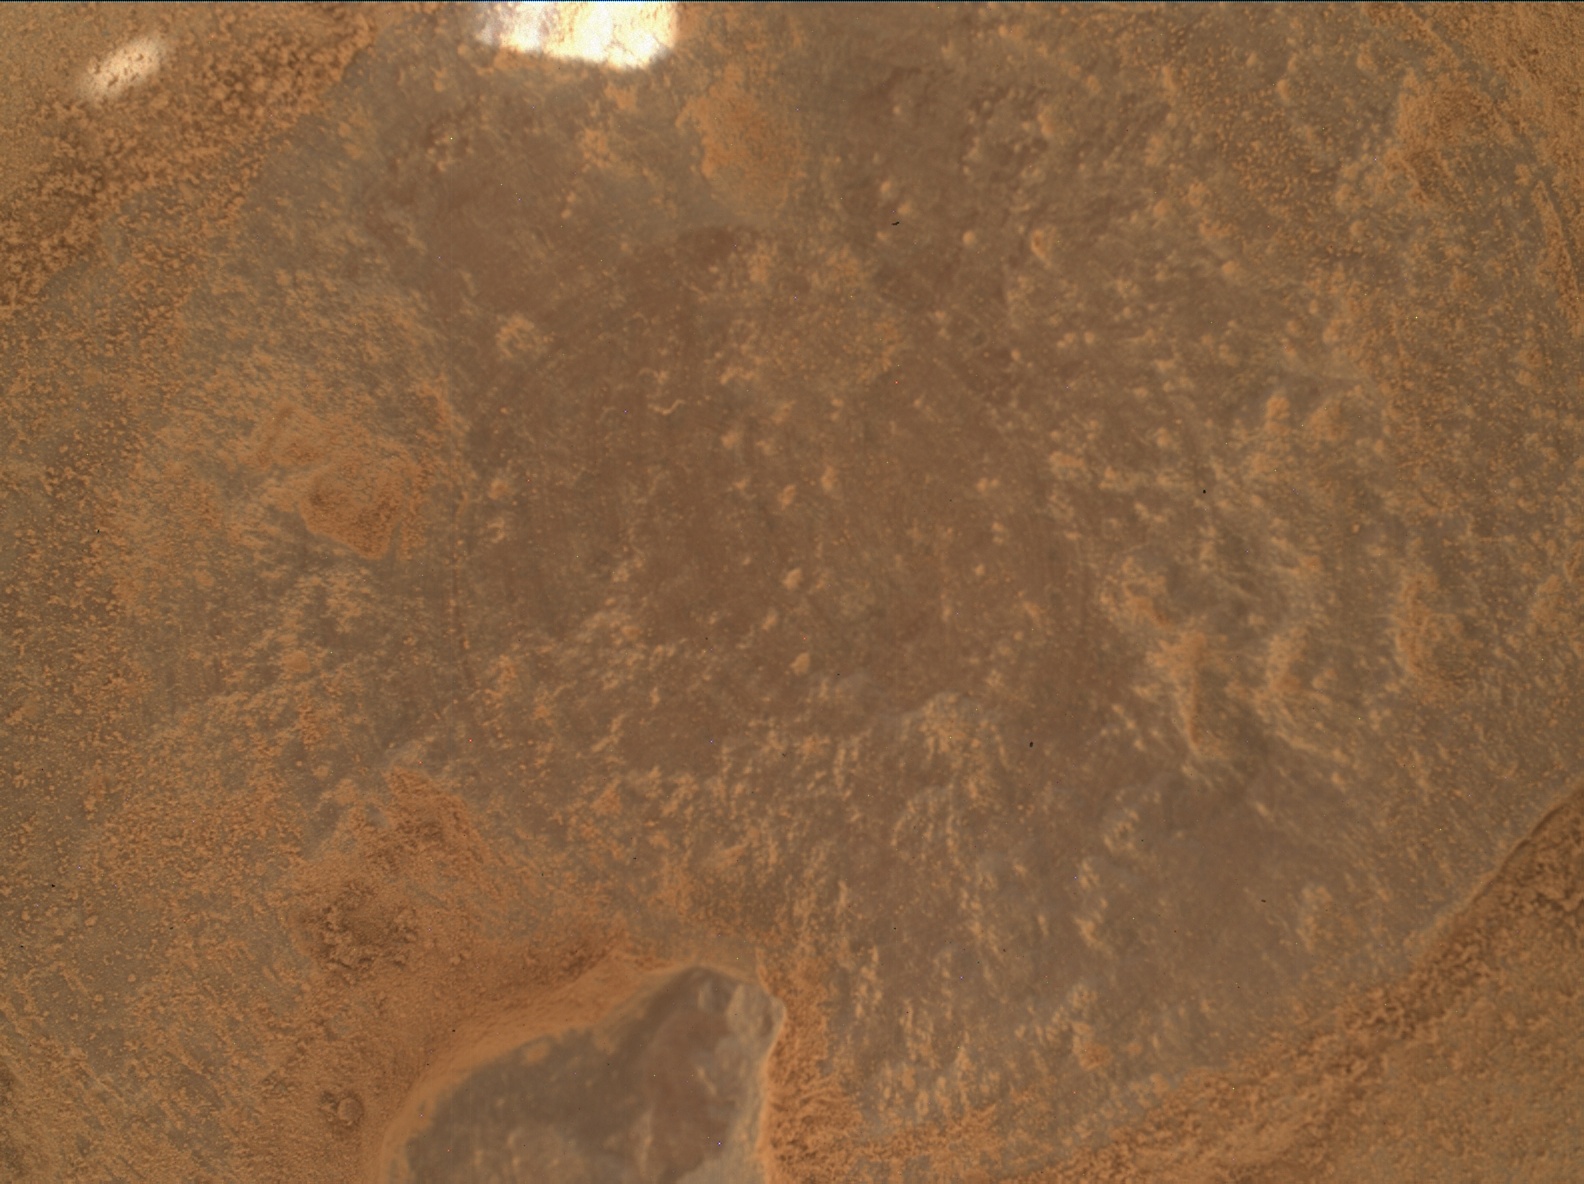 Nasa's Mars rover Curiosity acquired this image using its Mars Hand Lens Imager (MAHLI) on Sol 3677